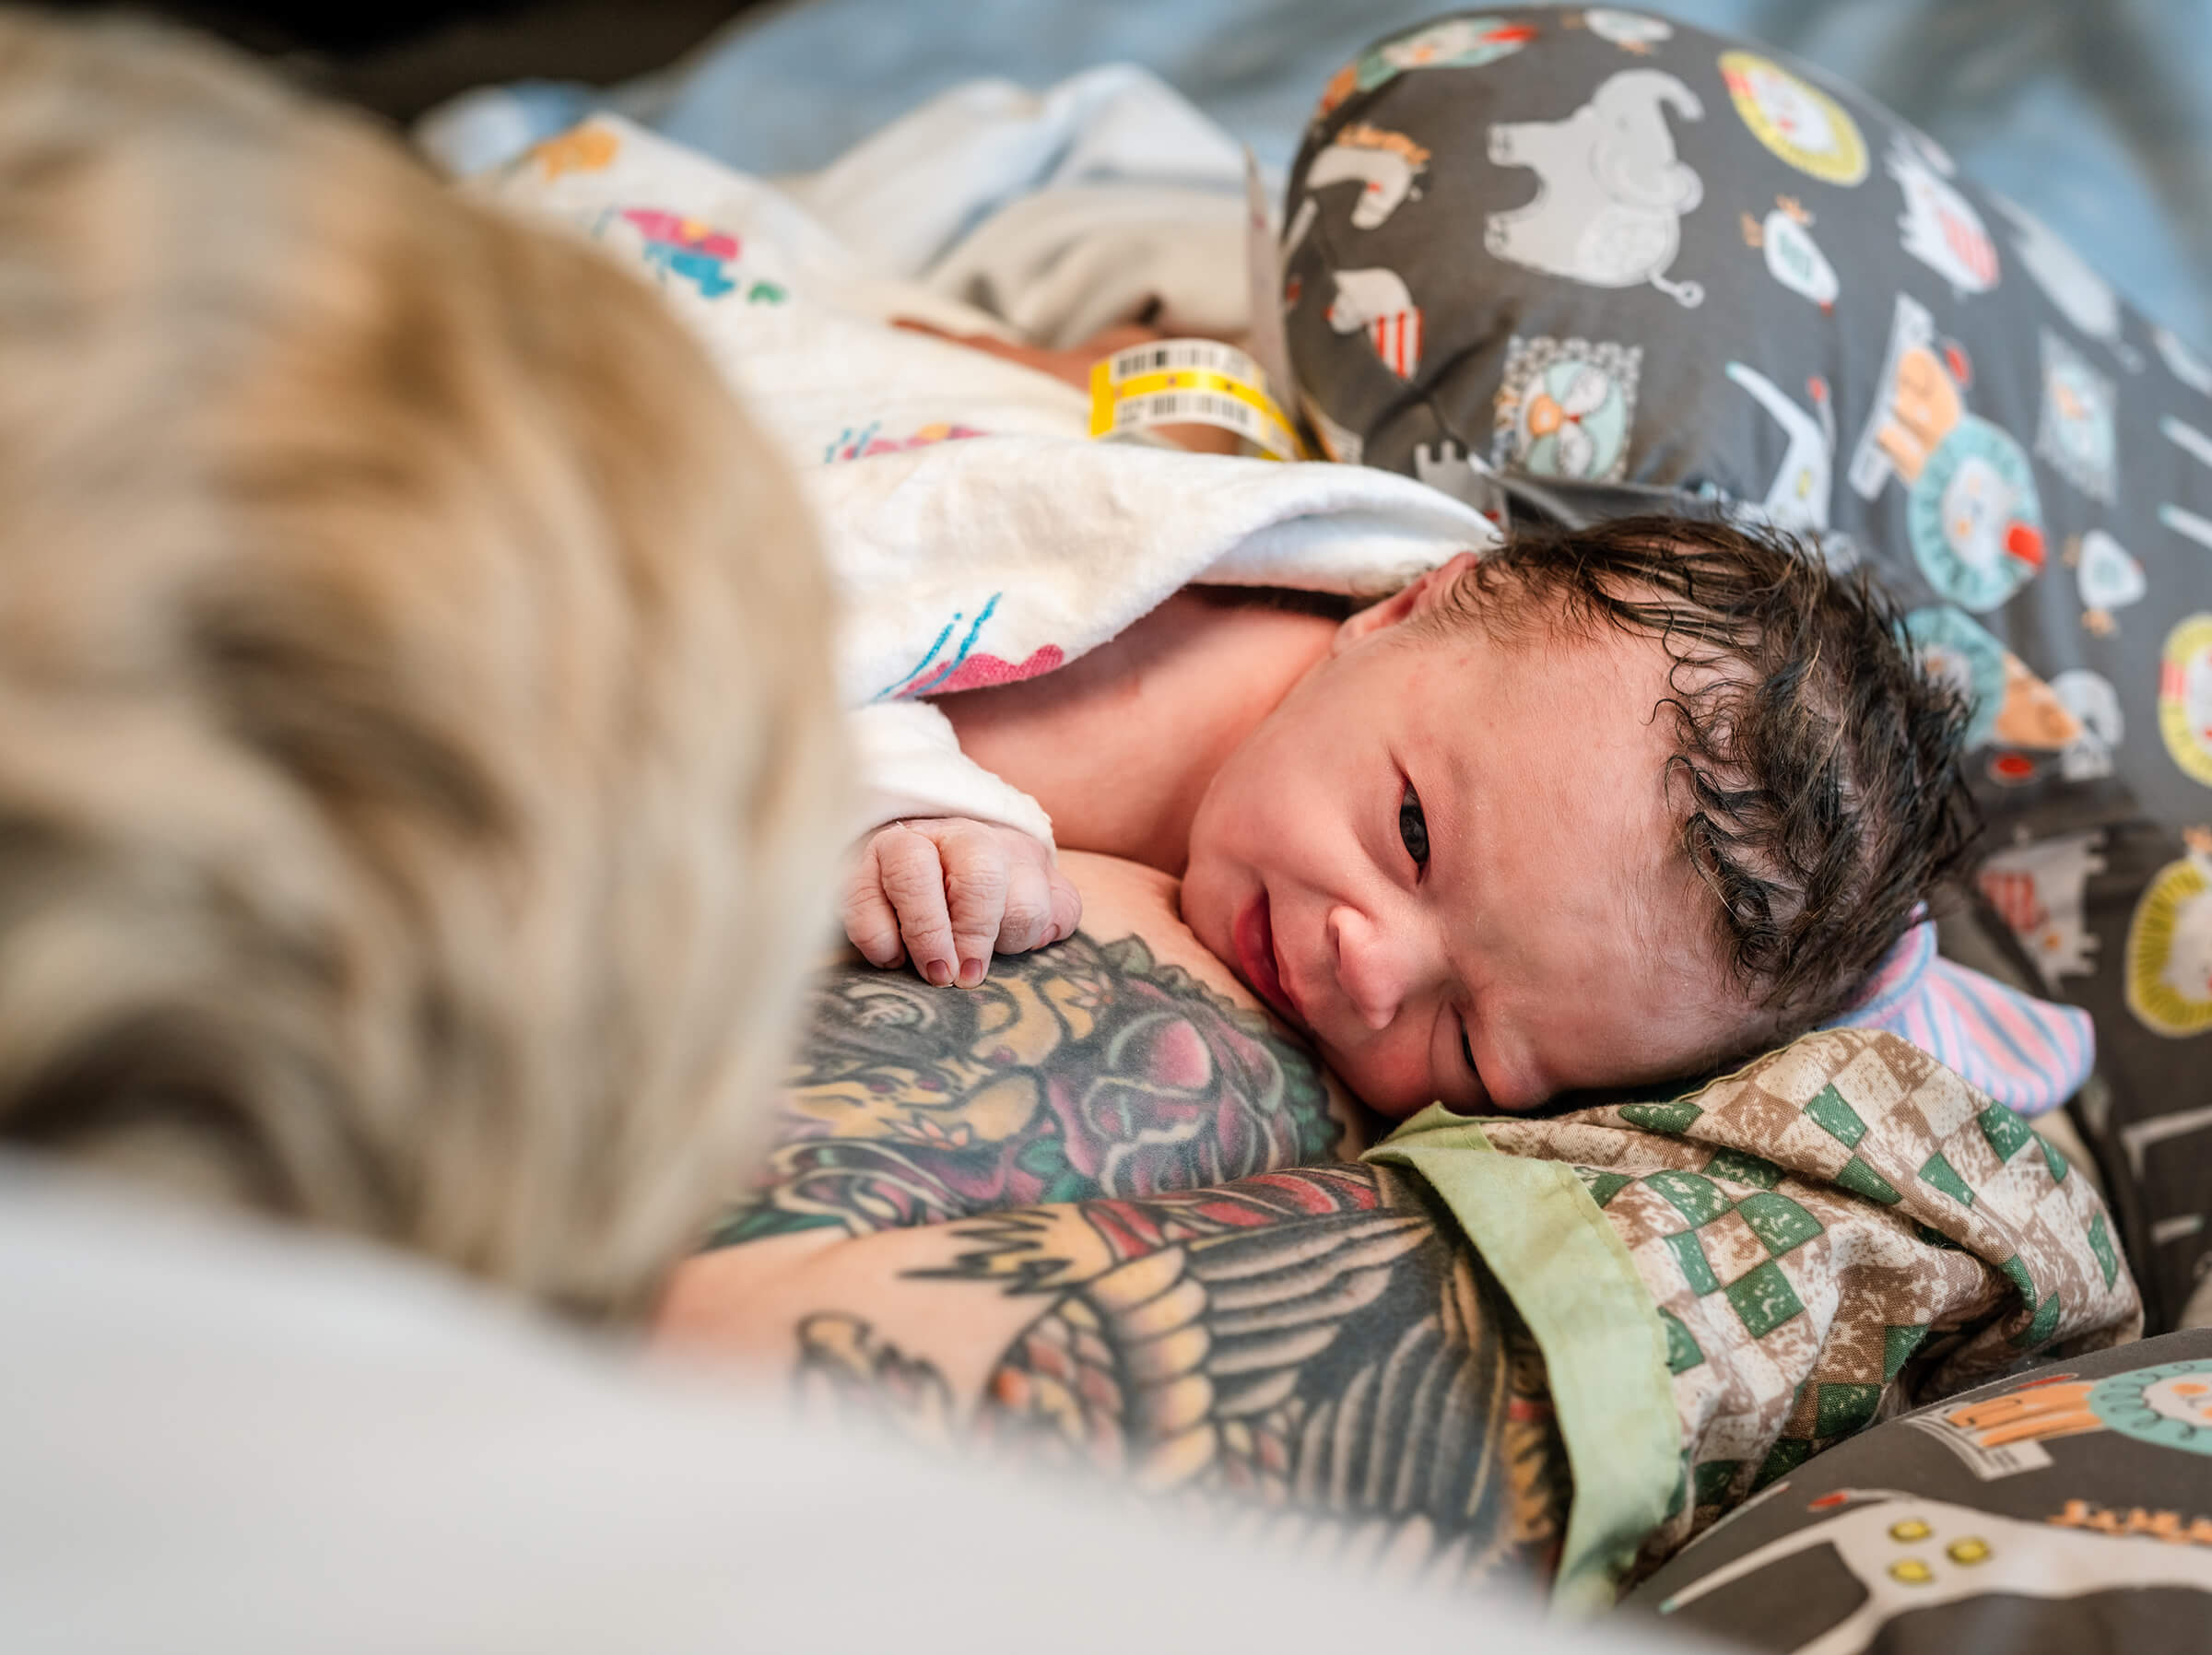 eye to eye contact with baby after delivery